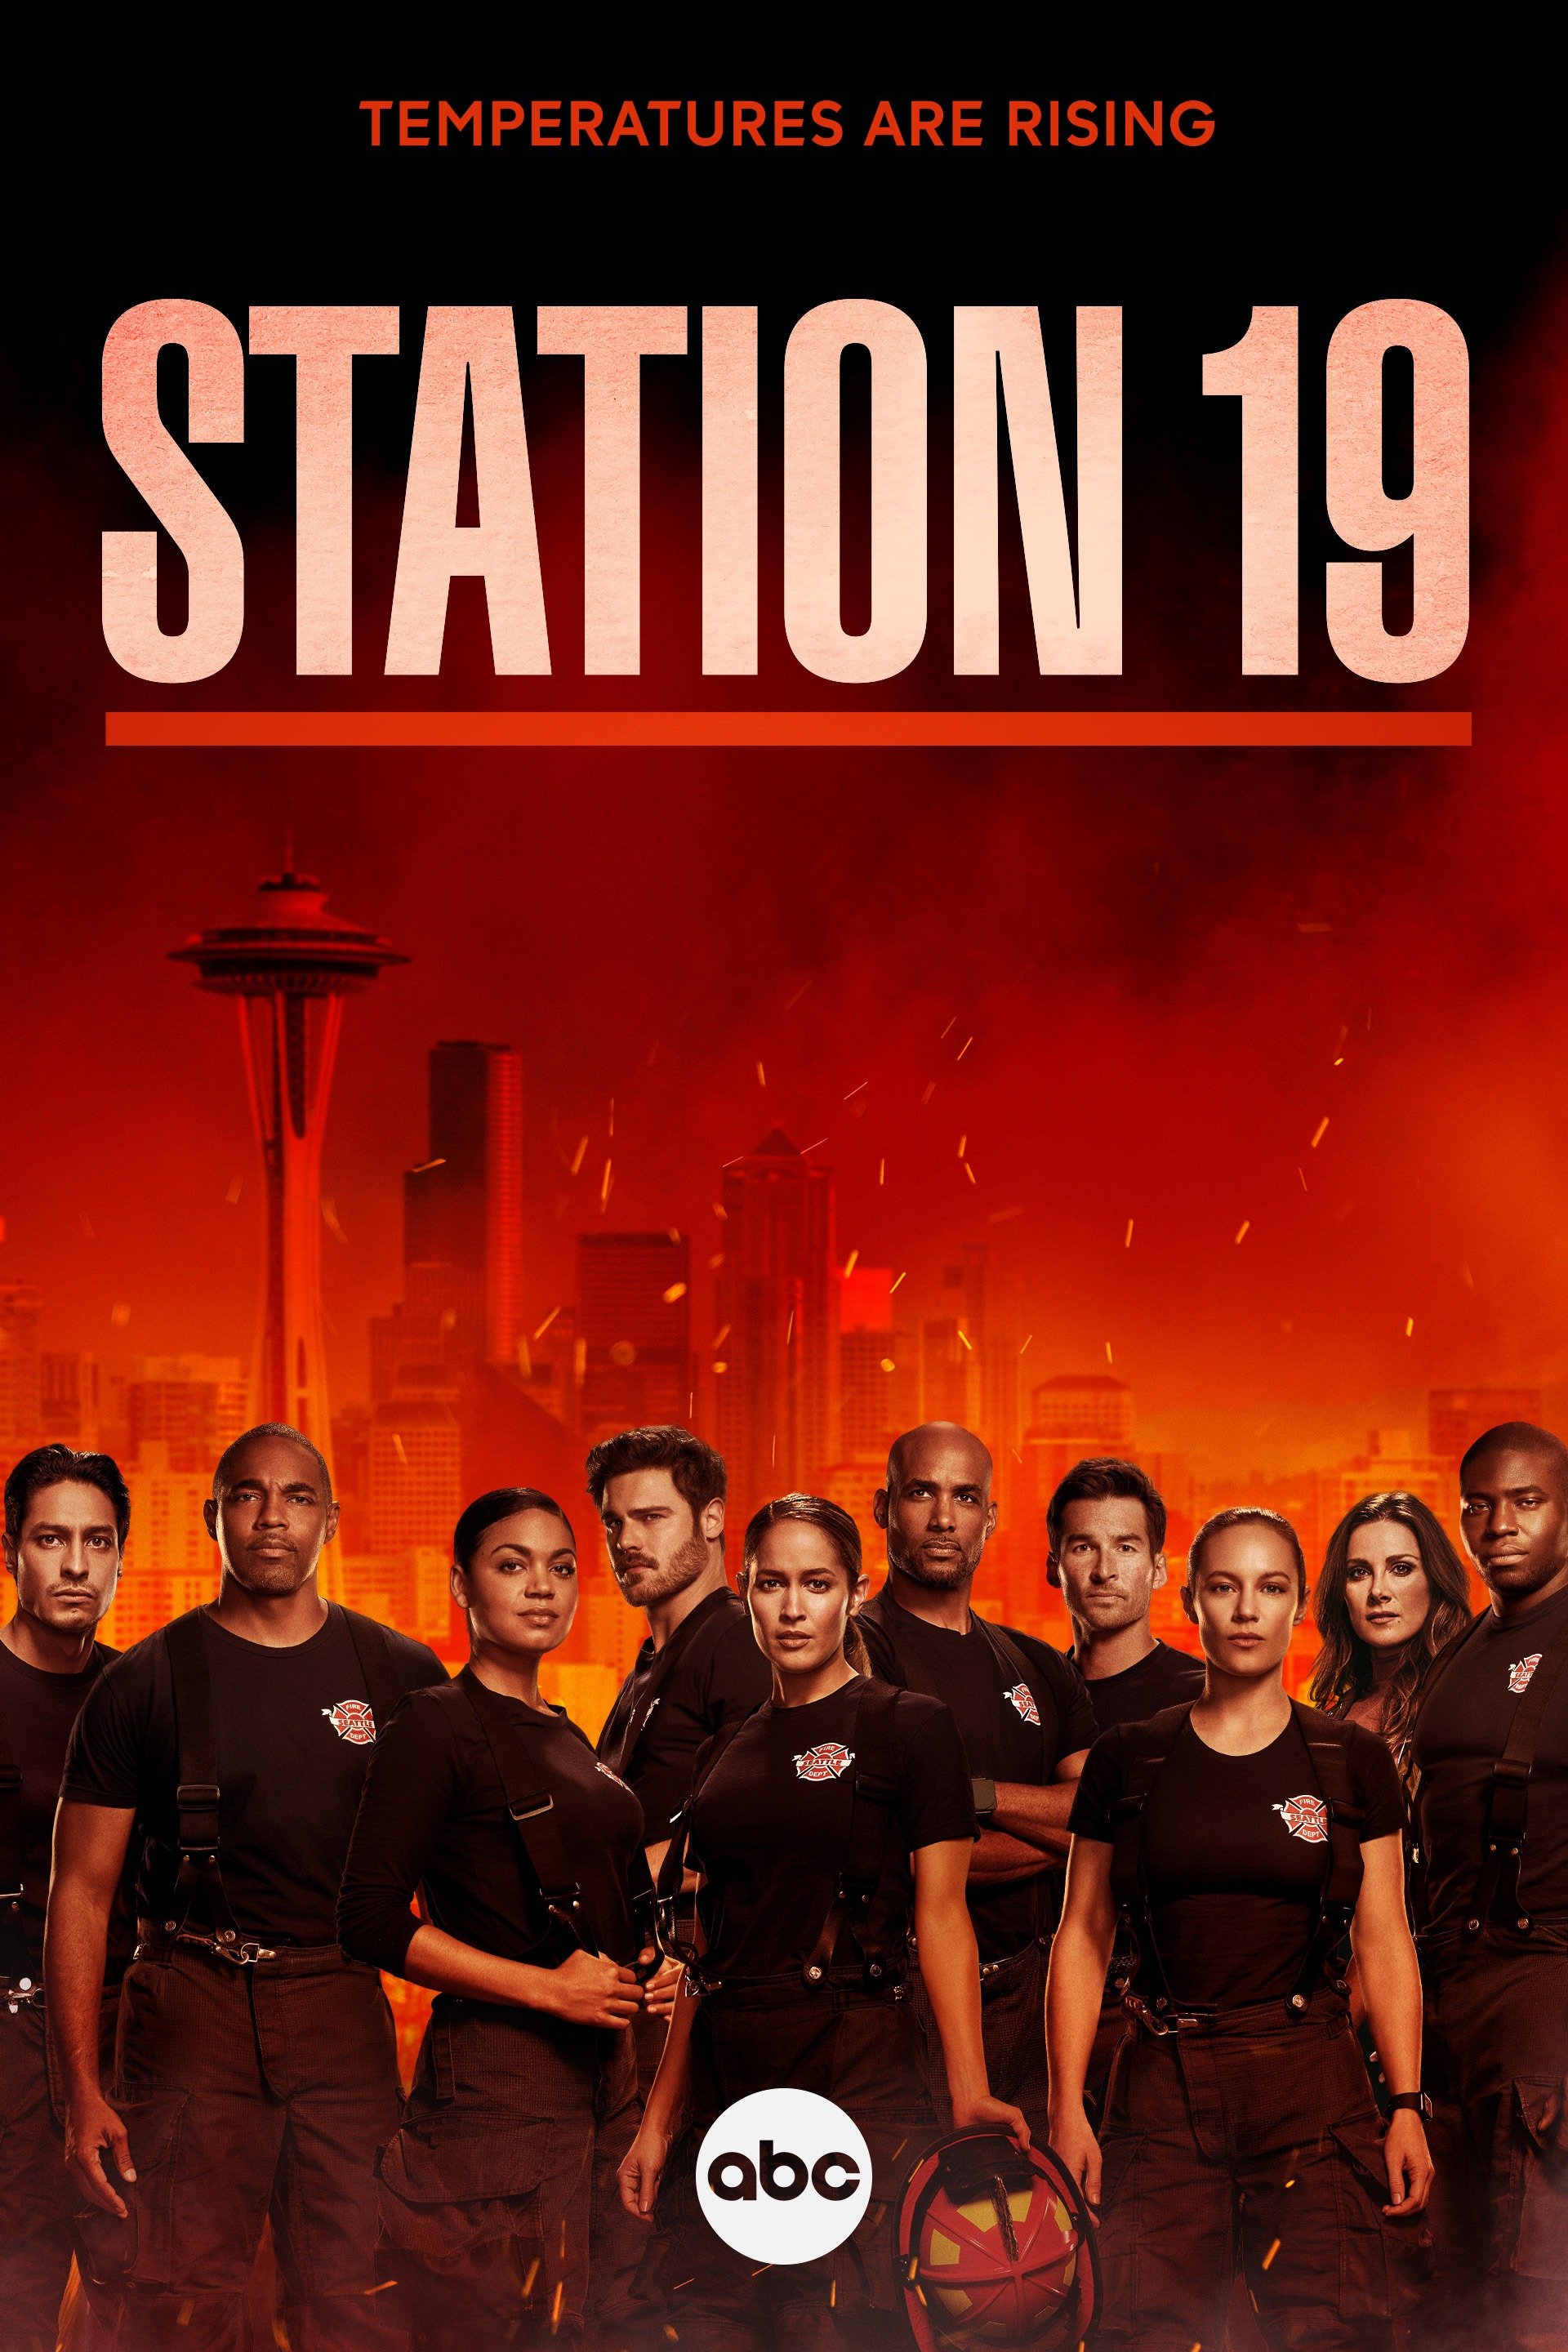 Station 19 Rotten Tomatoes